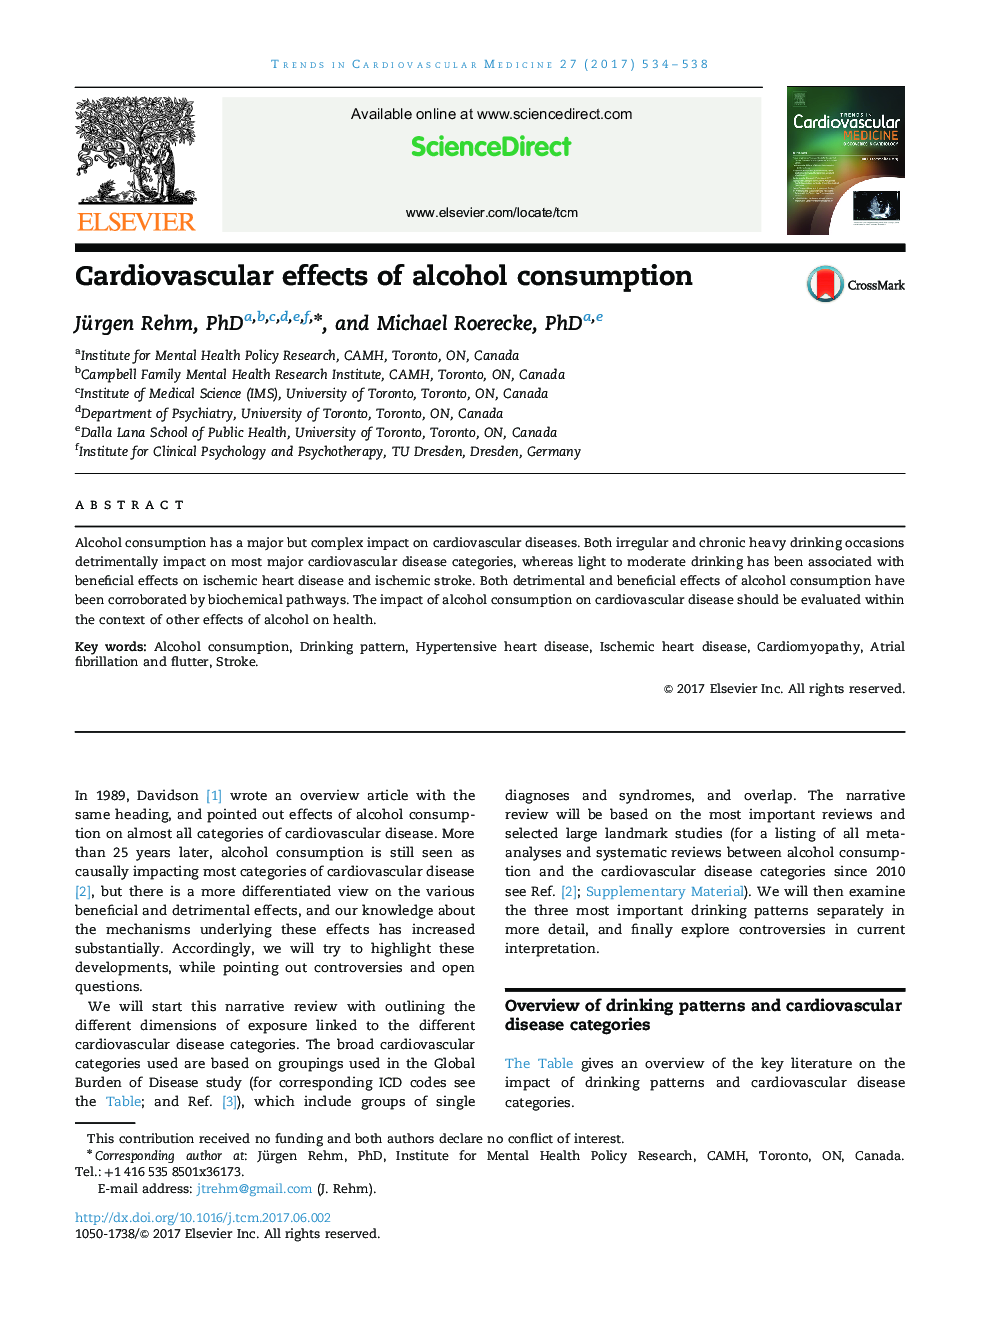 Cardiovascular effects of alcohol consumption